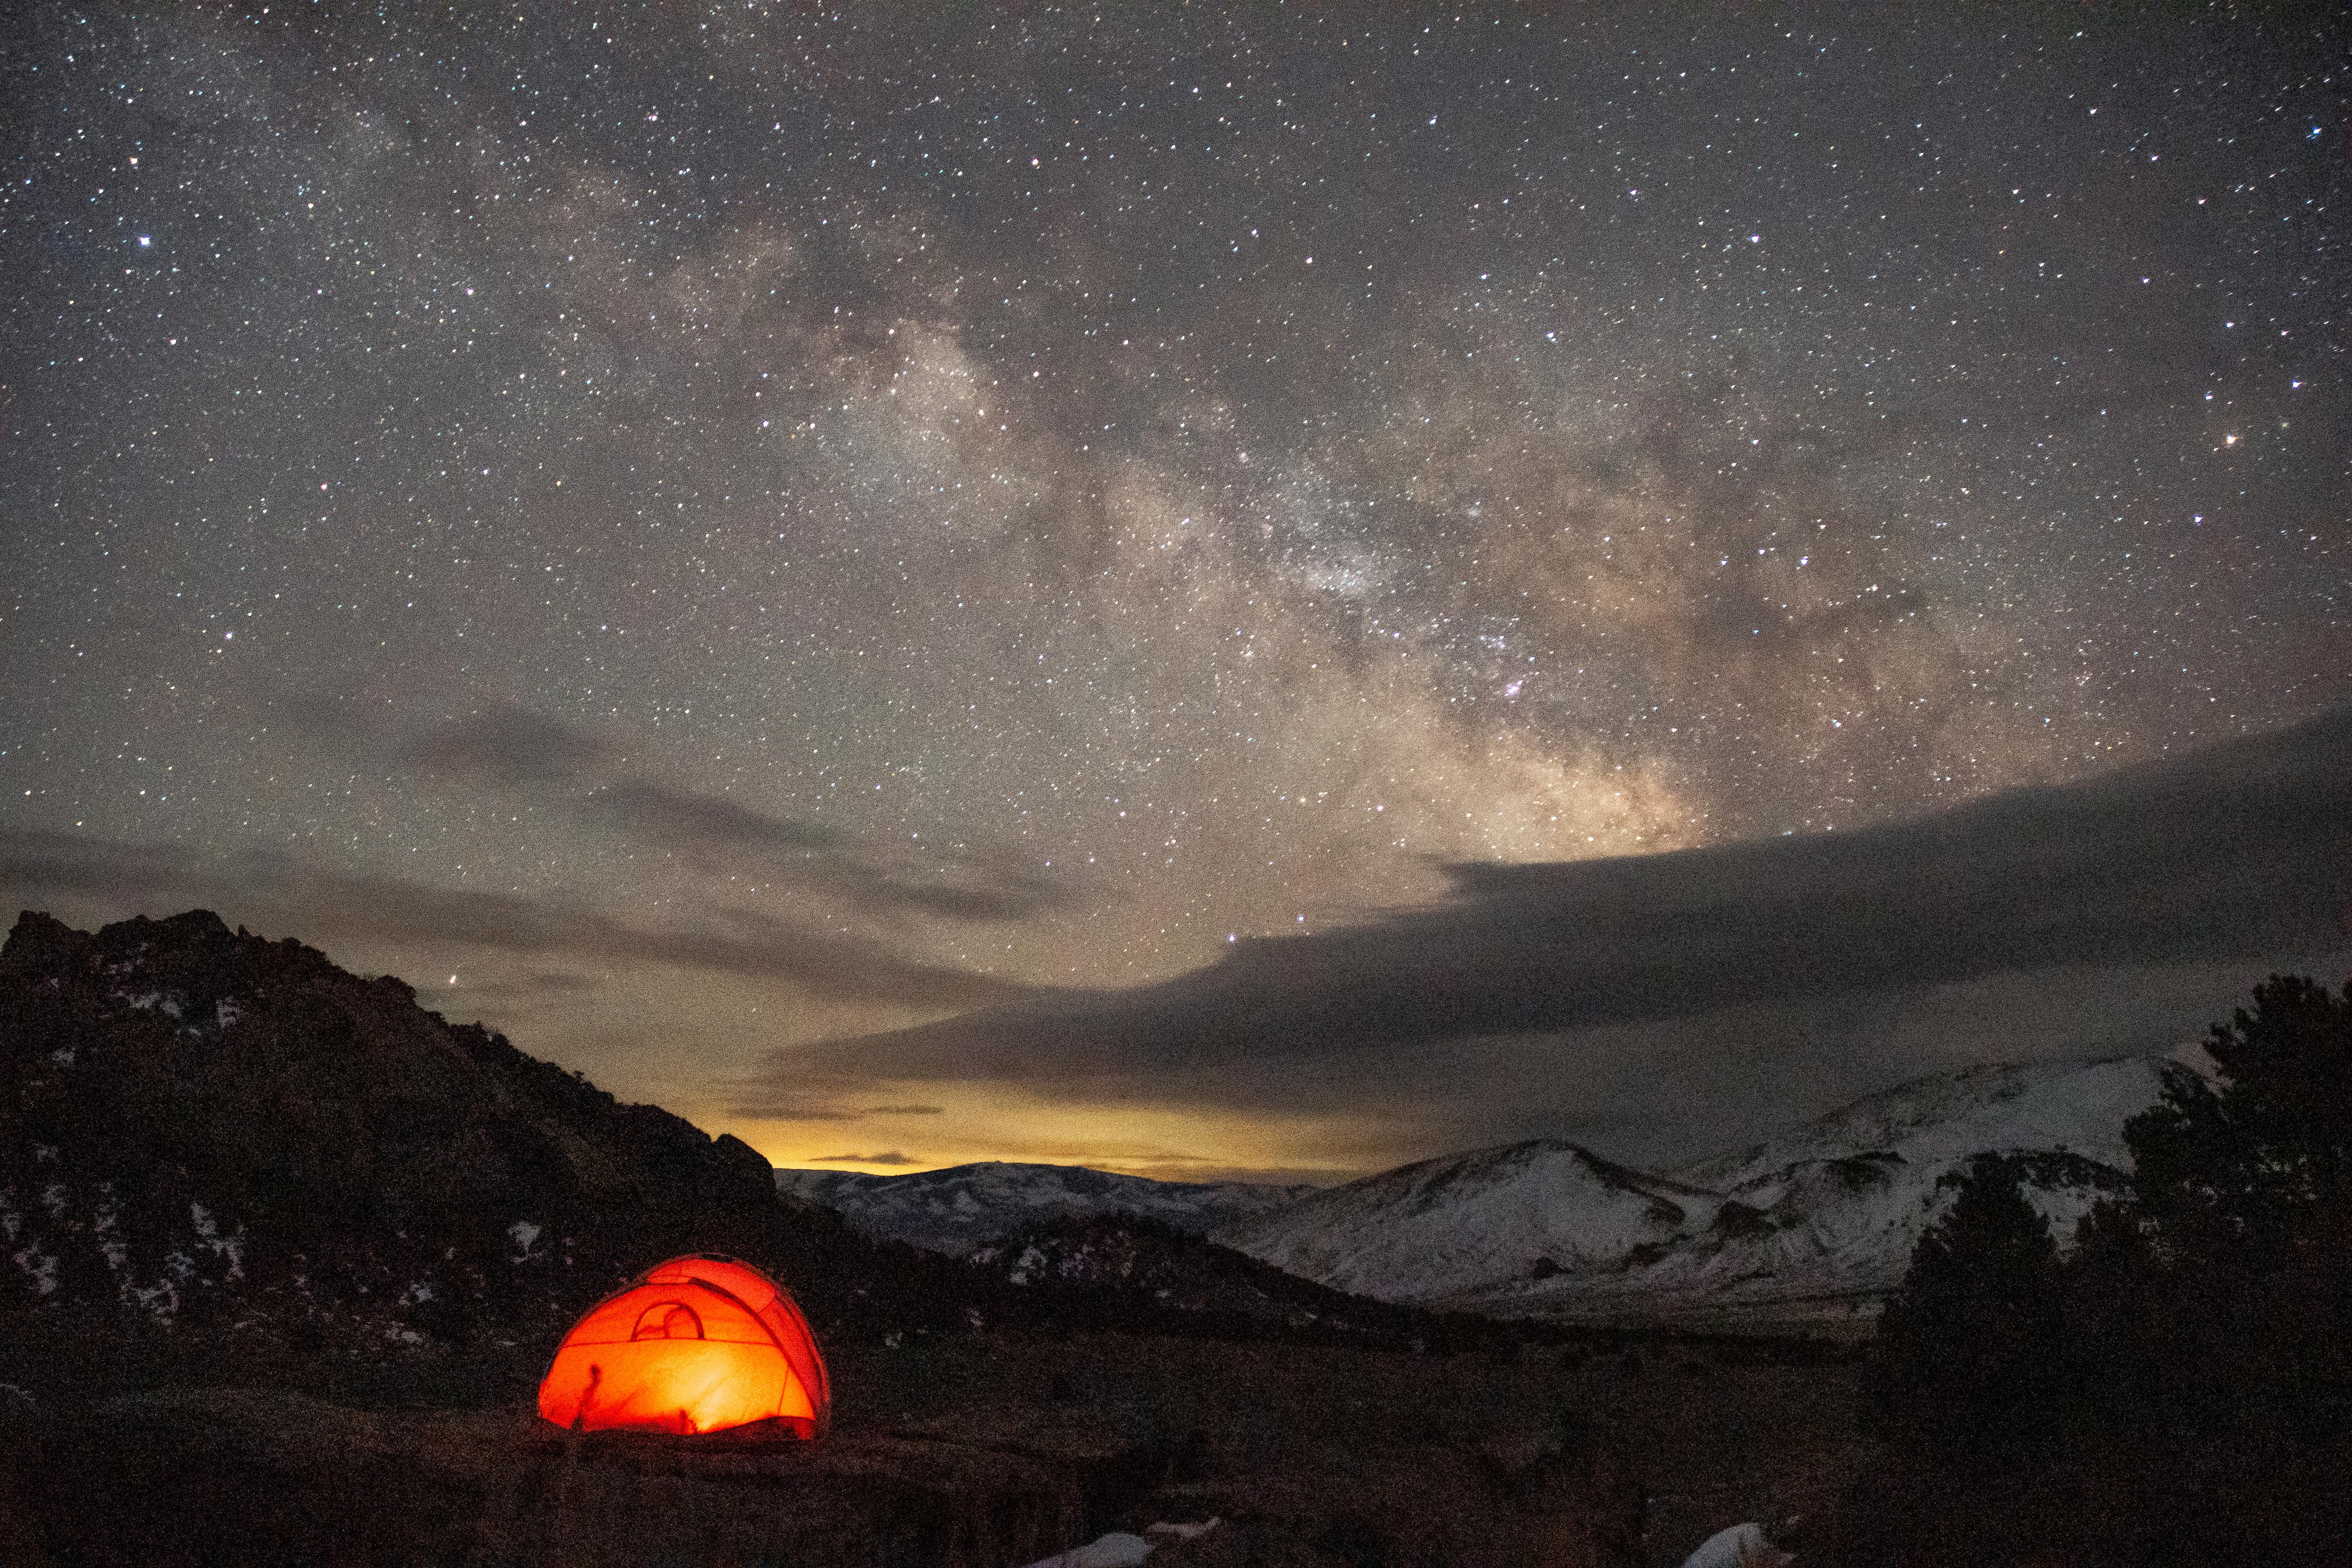 An orange tent glows in early pre-dawn beneath the milky way in a star filled sky.